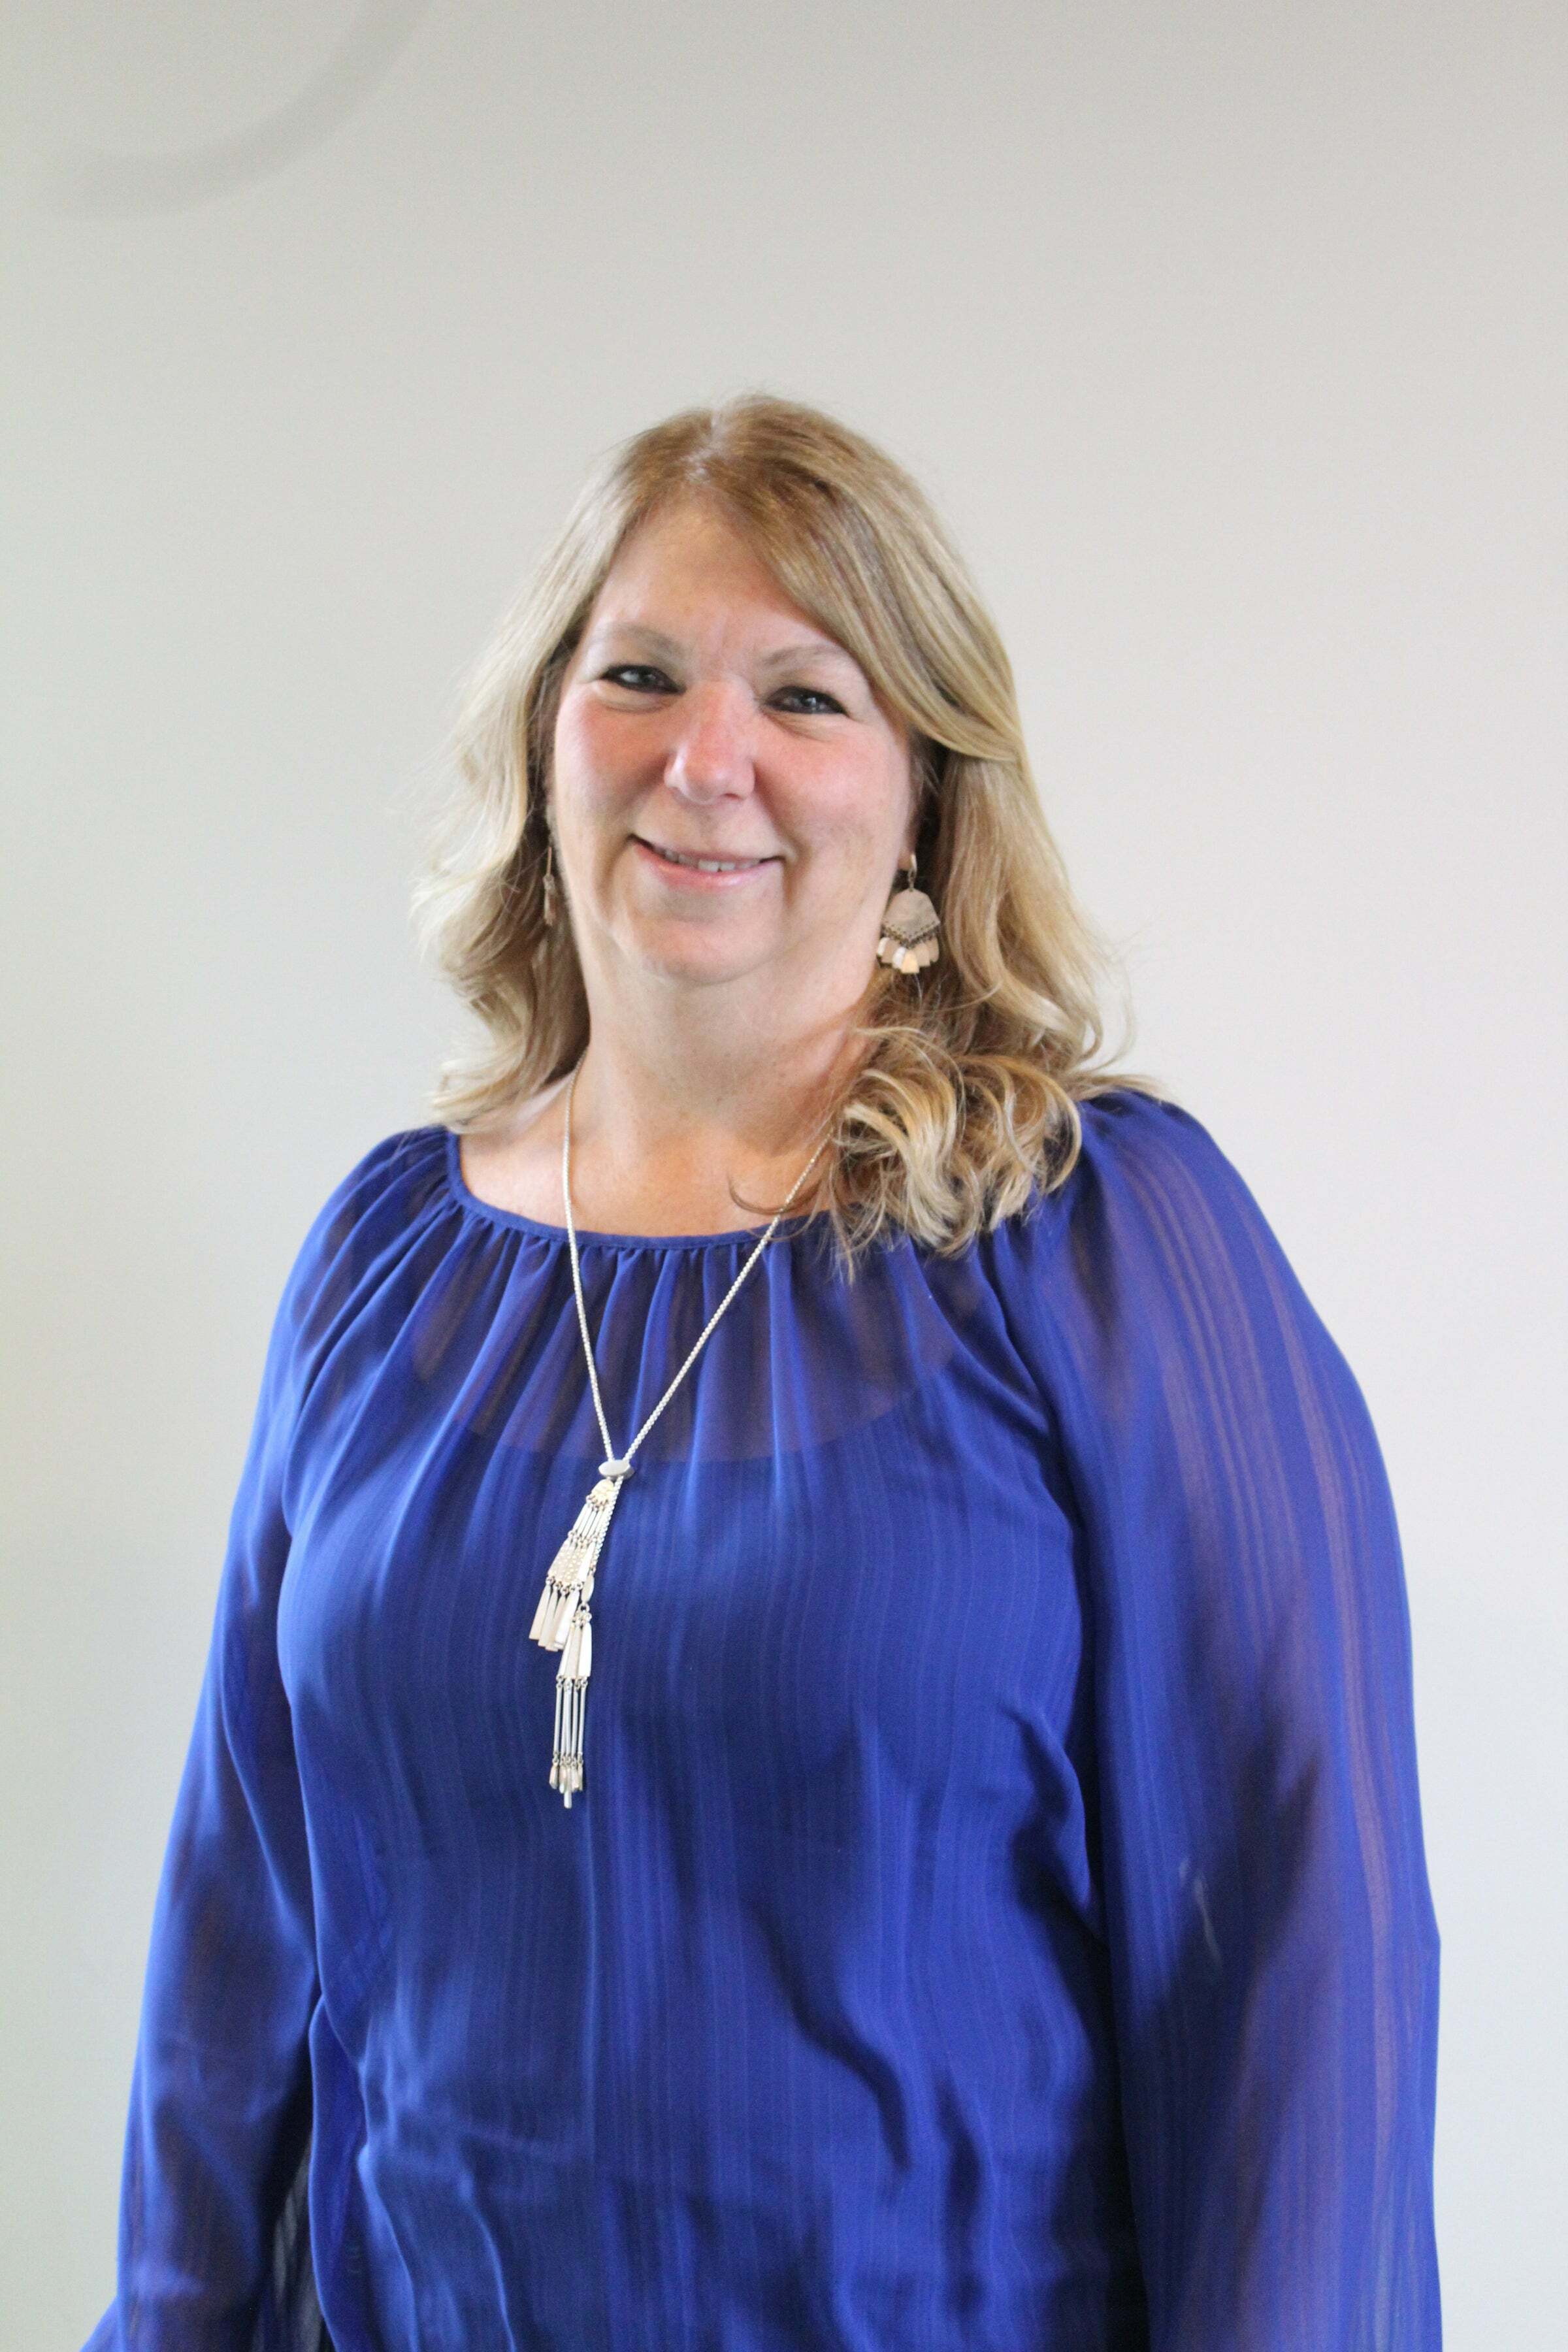 Dori Quatkemeyer, Real Estate Salesperson in West Chester, ERA Real Solutions Realty